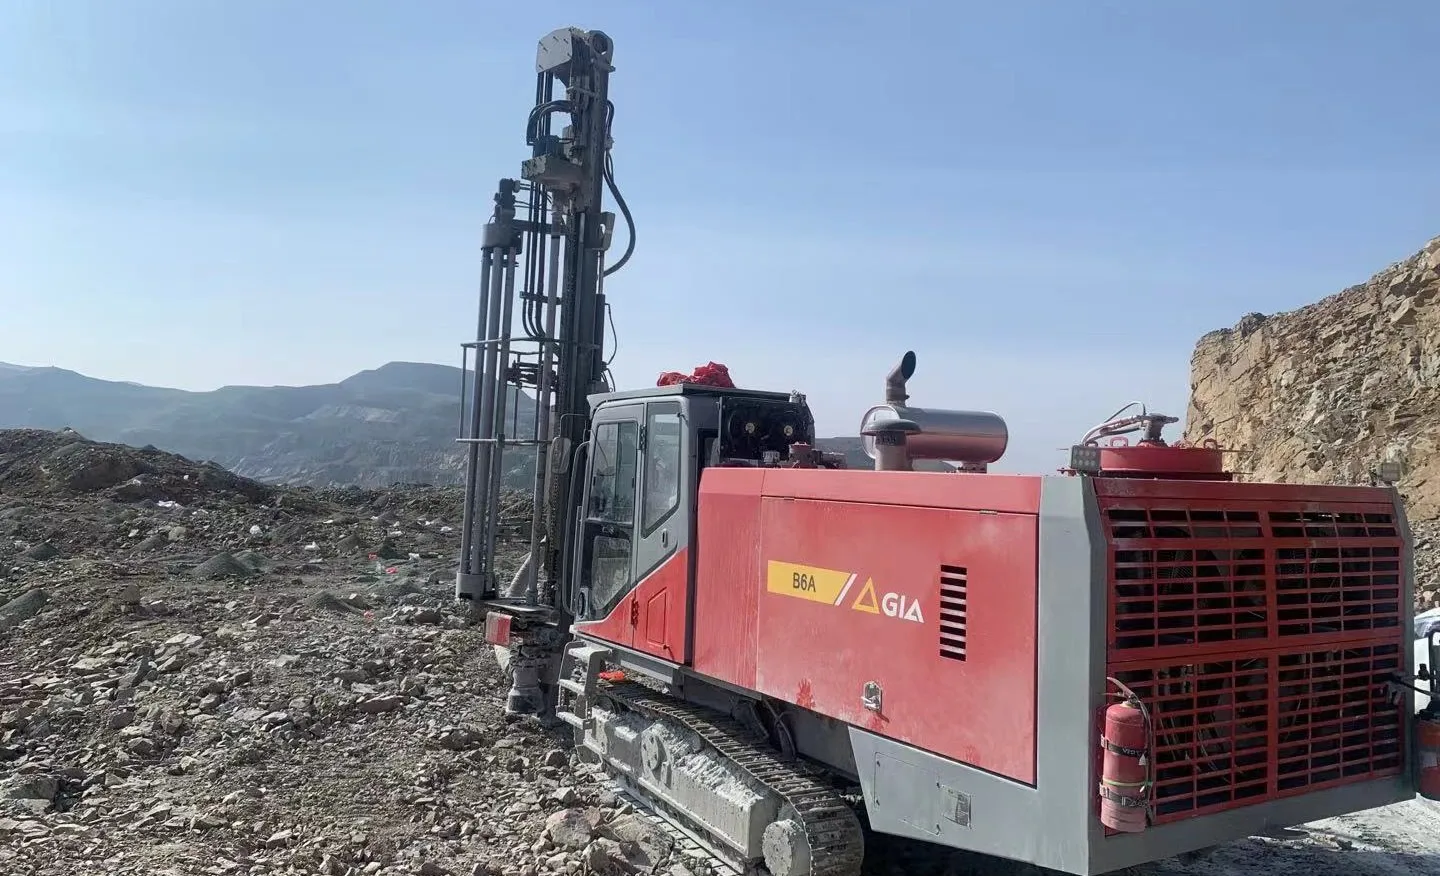 jieyaB6A DTH hydraulic drilling rig mining integrated dth drill rig underground mining equipment down-the-hole drilling rig